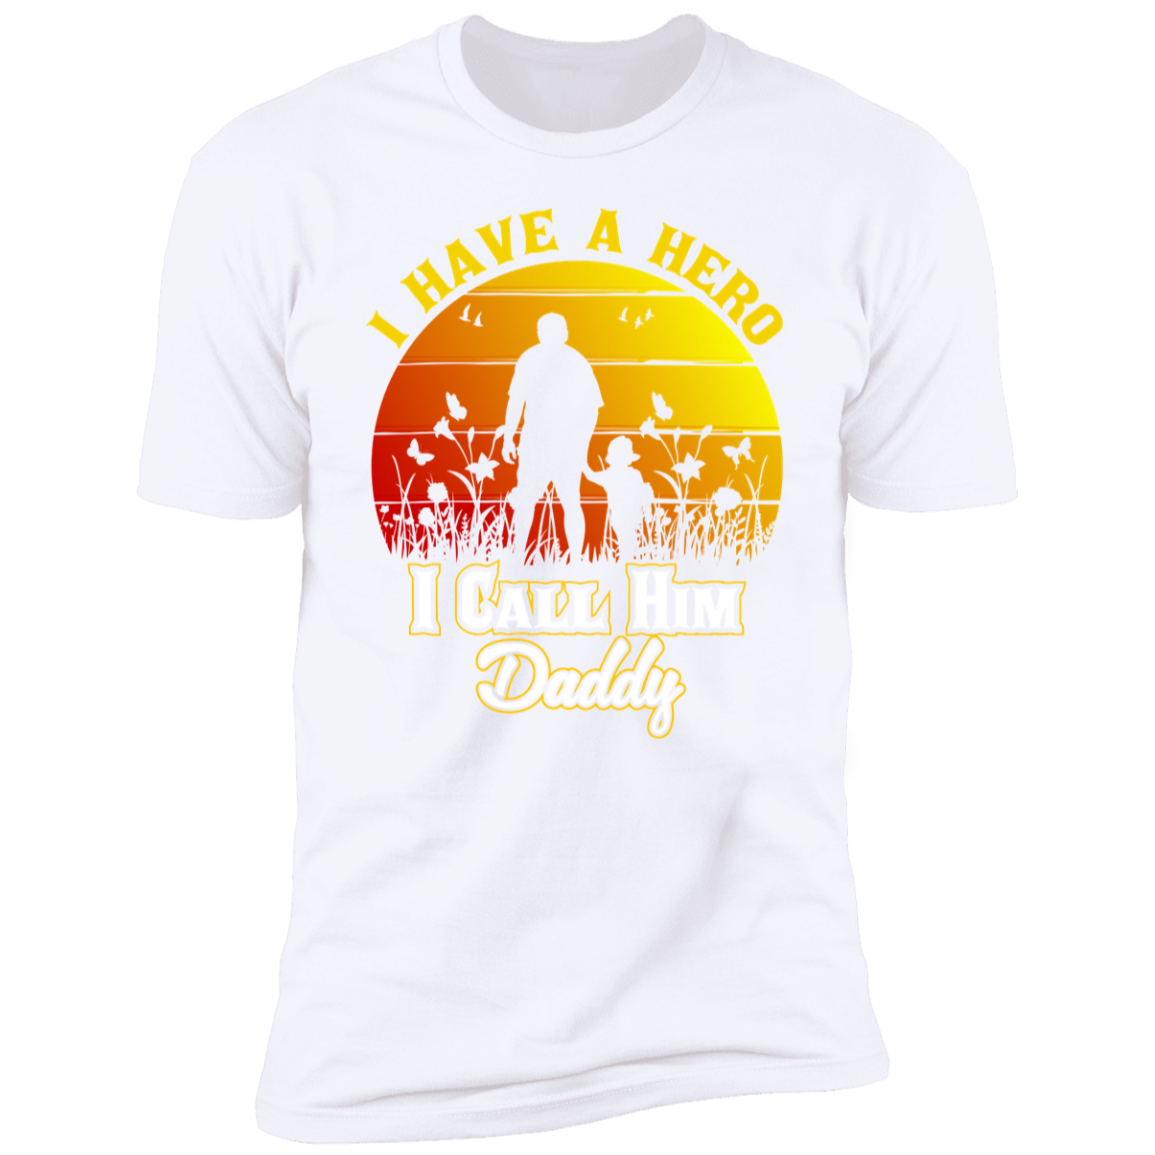 I HAVE A HERO I CALL HIM DADDY-Premium Short Sleeve T-Shirt